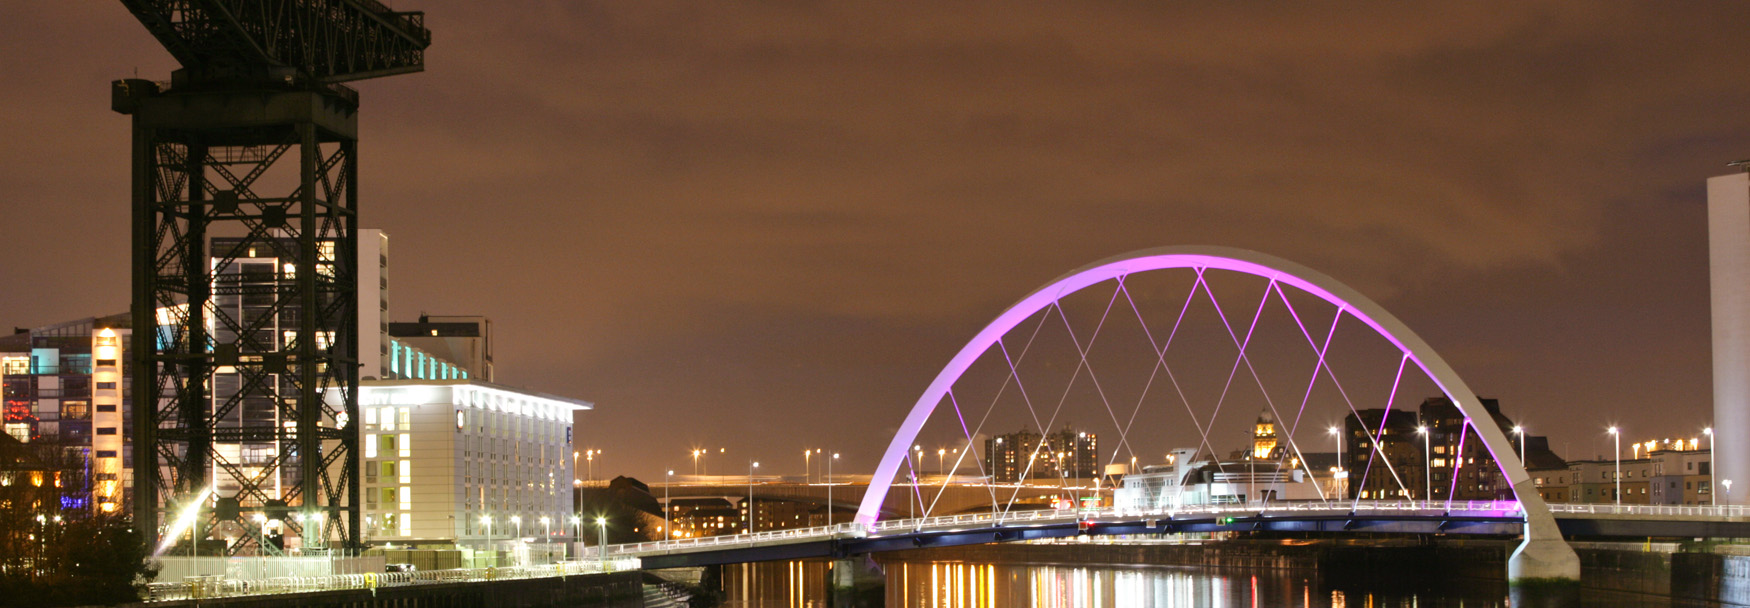 Planning Glasgow’s Post-Pandemic Economic Recovery   